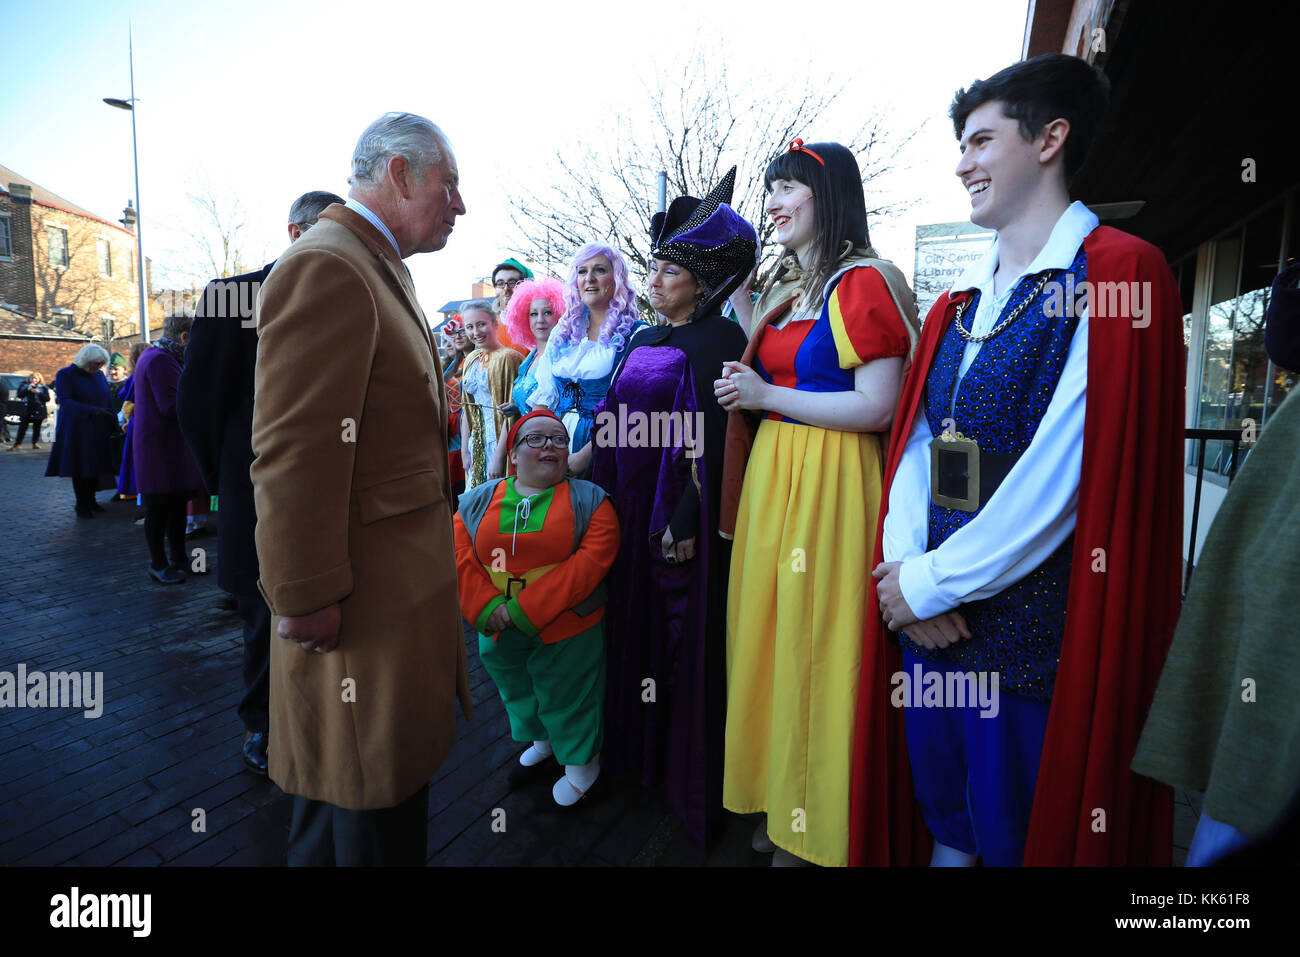 The Prince of Wales meeting pantomime actors at the Potteries Museum in Stoke-on-Trent. Stock Photo